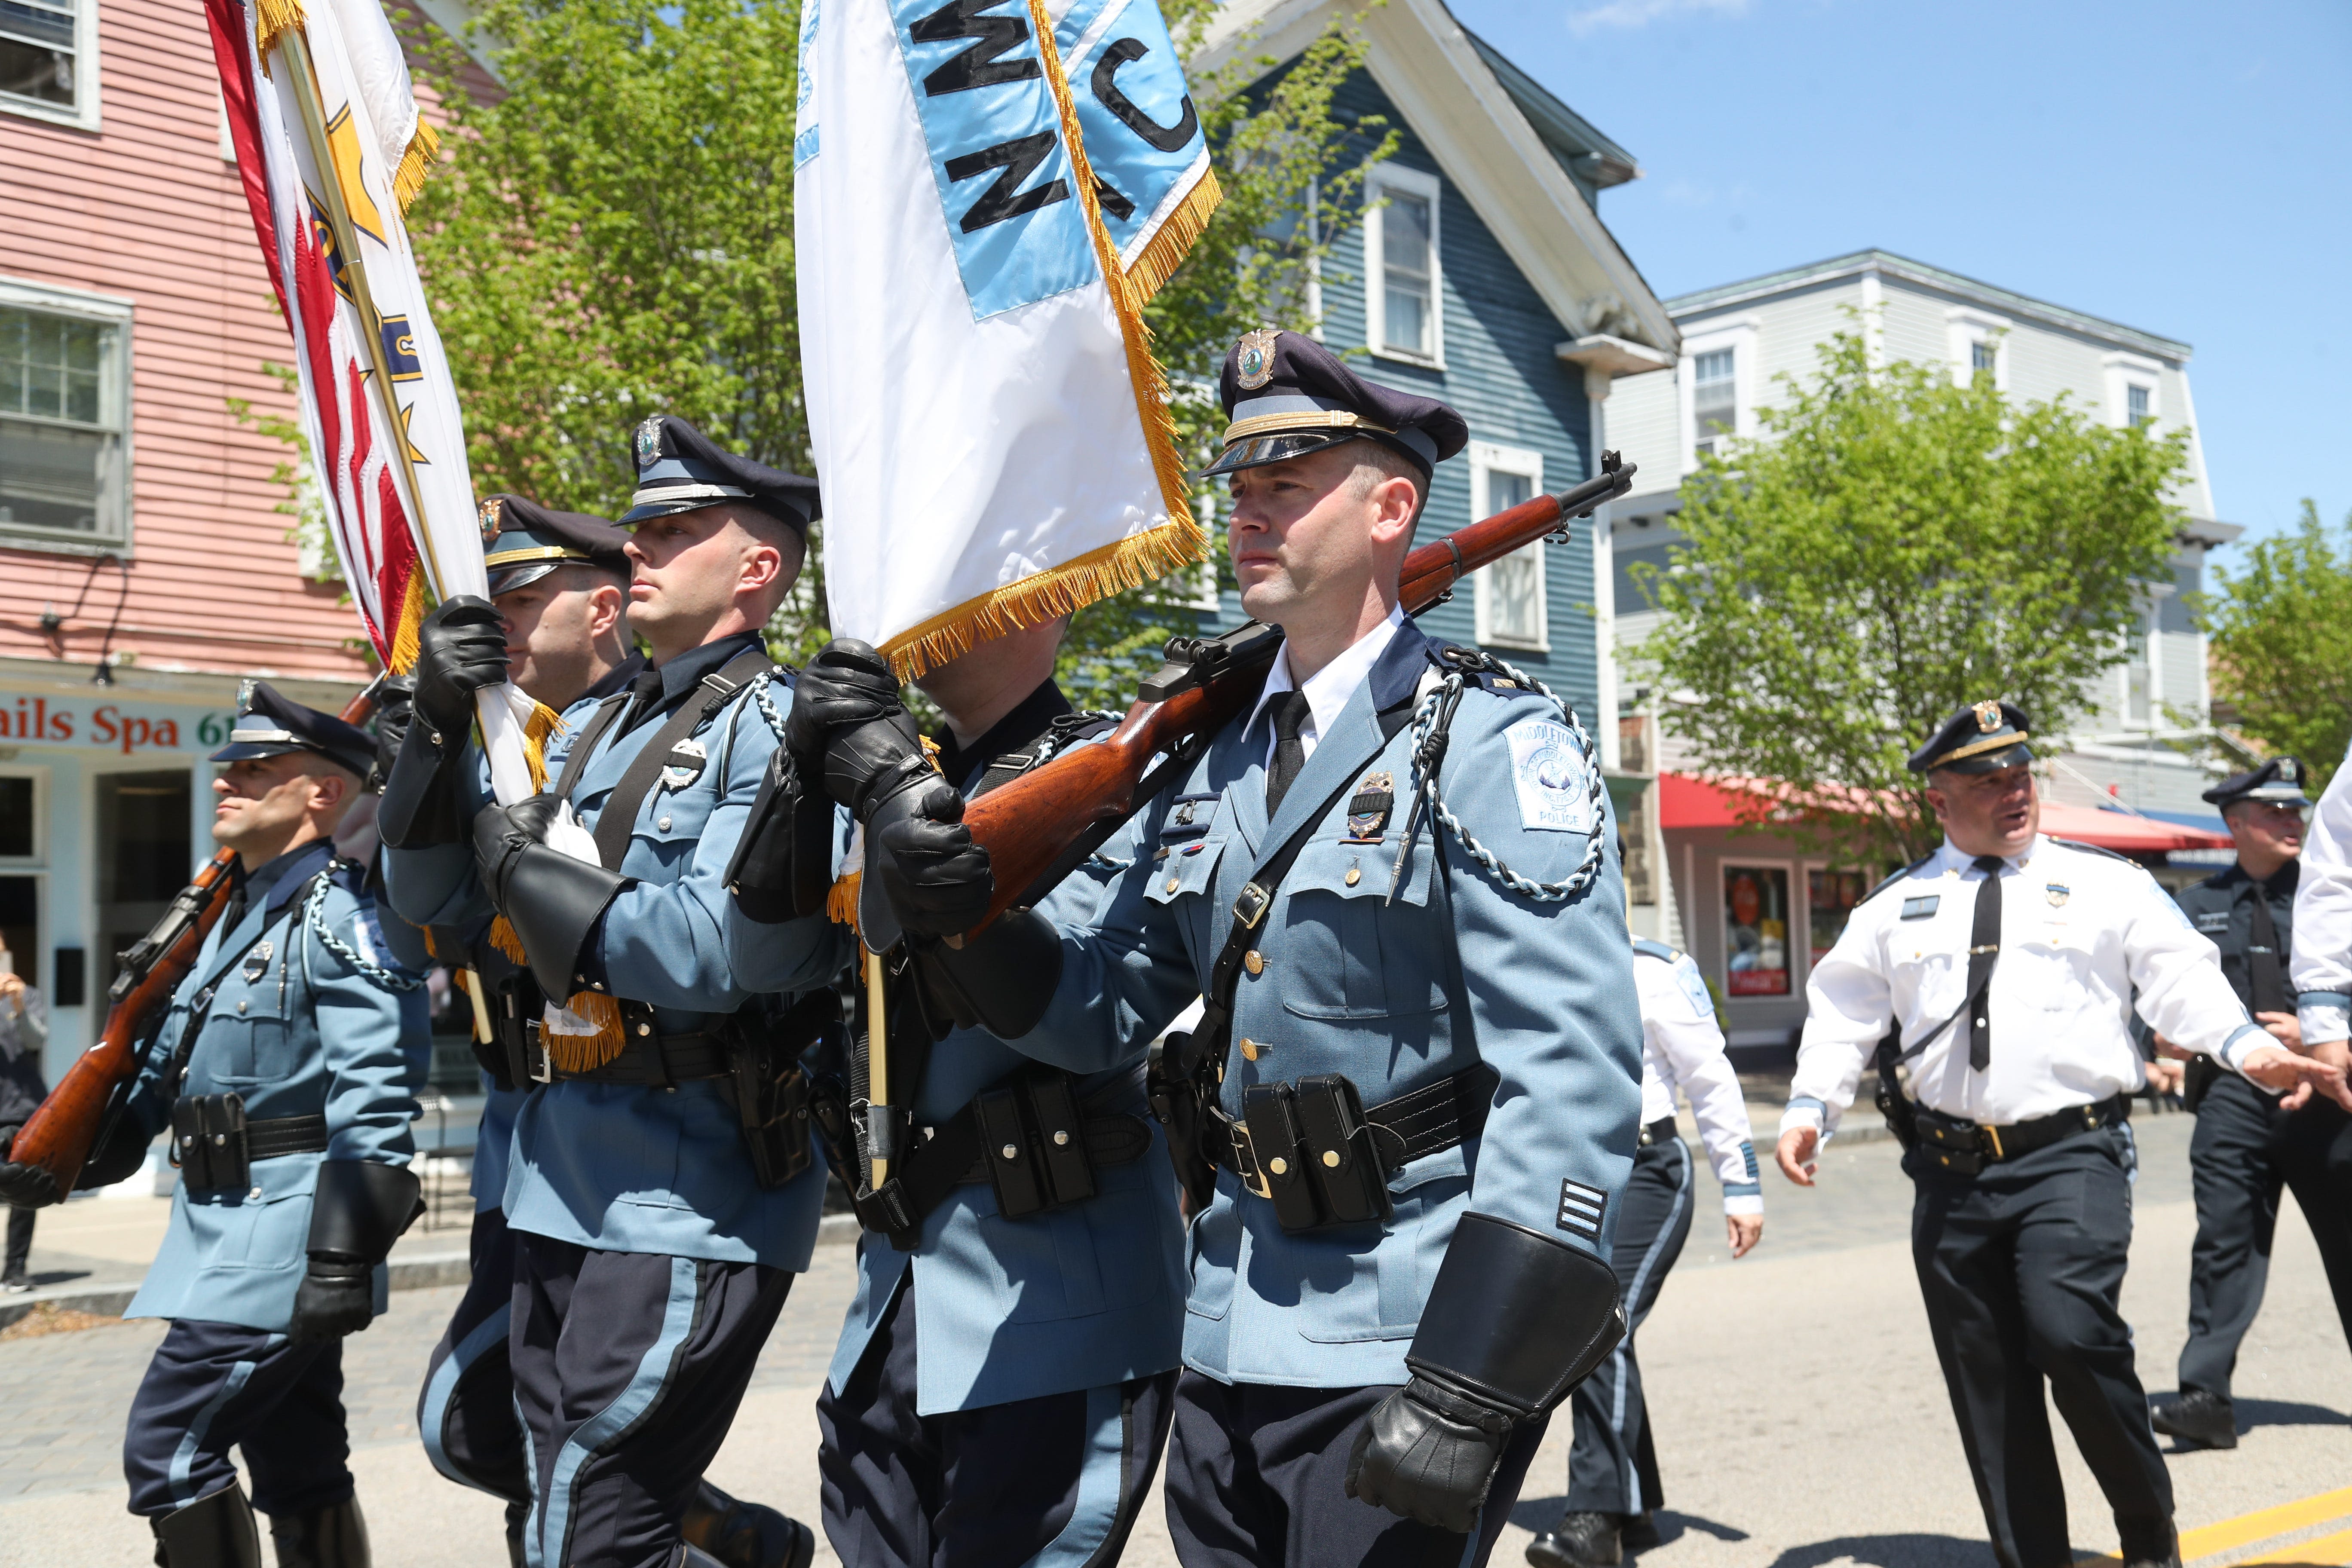 2024 Aquidneck Island National Police Parade returns in May. What you need to know